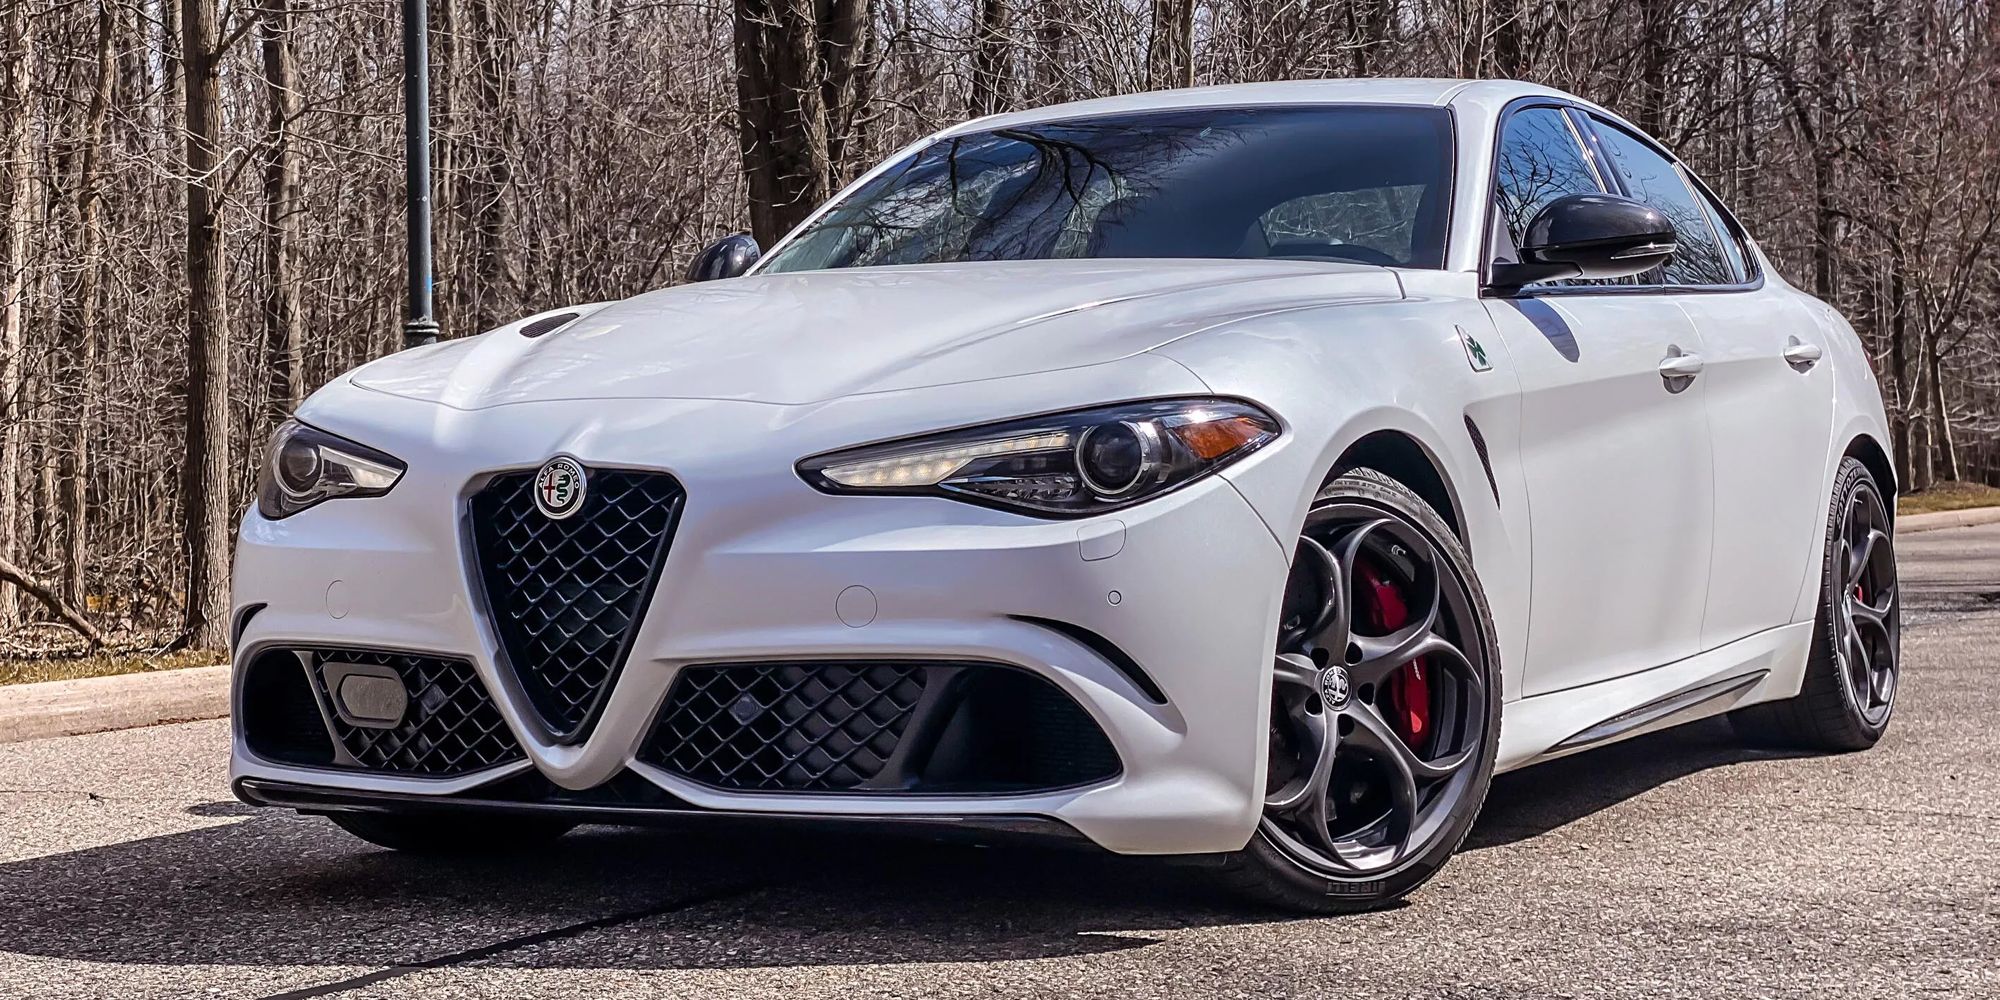 The front of the Giulia